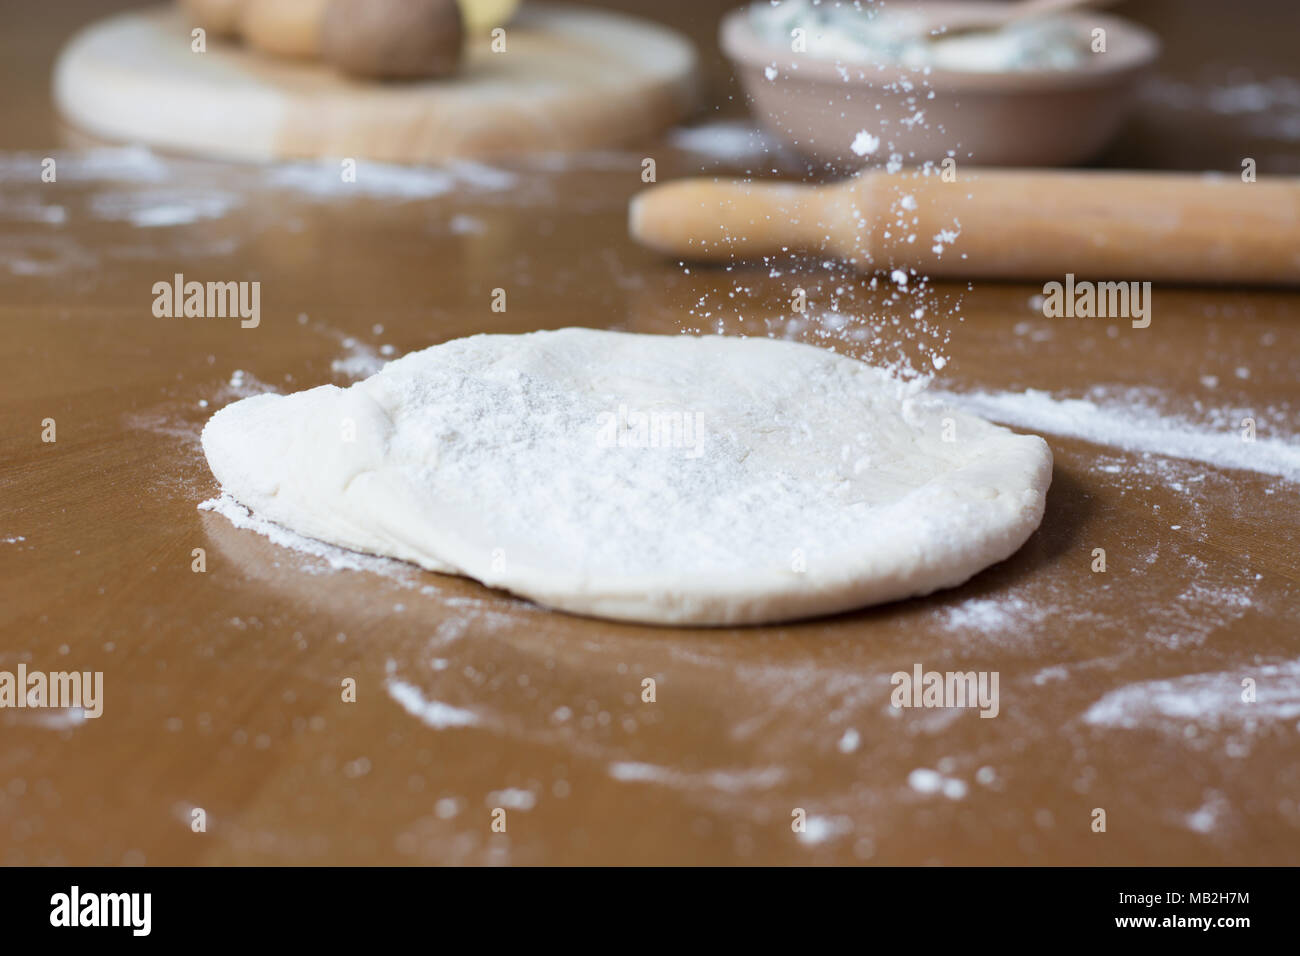 Making of Homemade cheese Pie or other kind of pastry appetizer or sweets on a backing Tray. Stock Photo